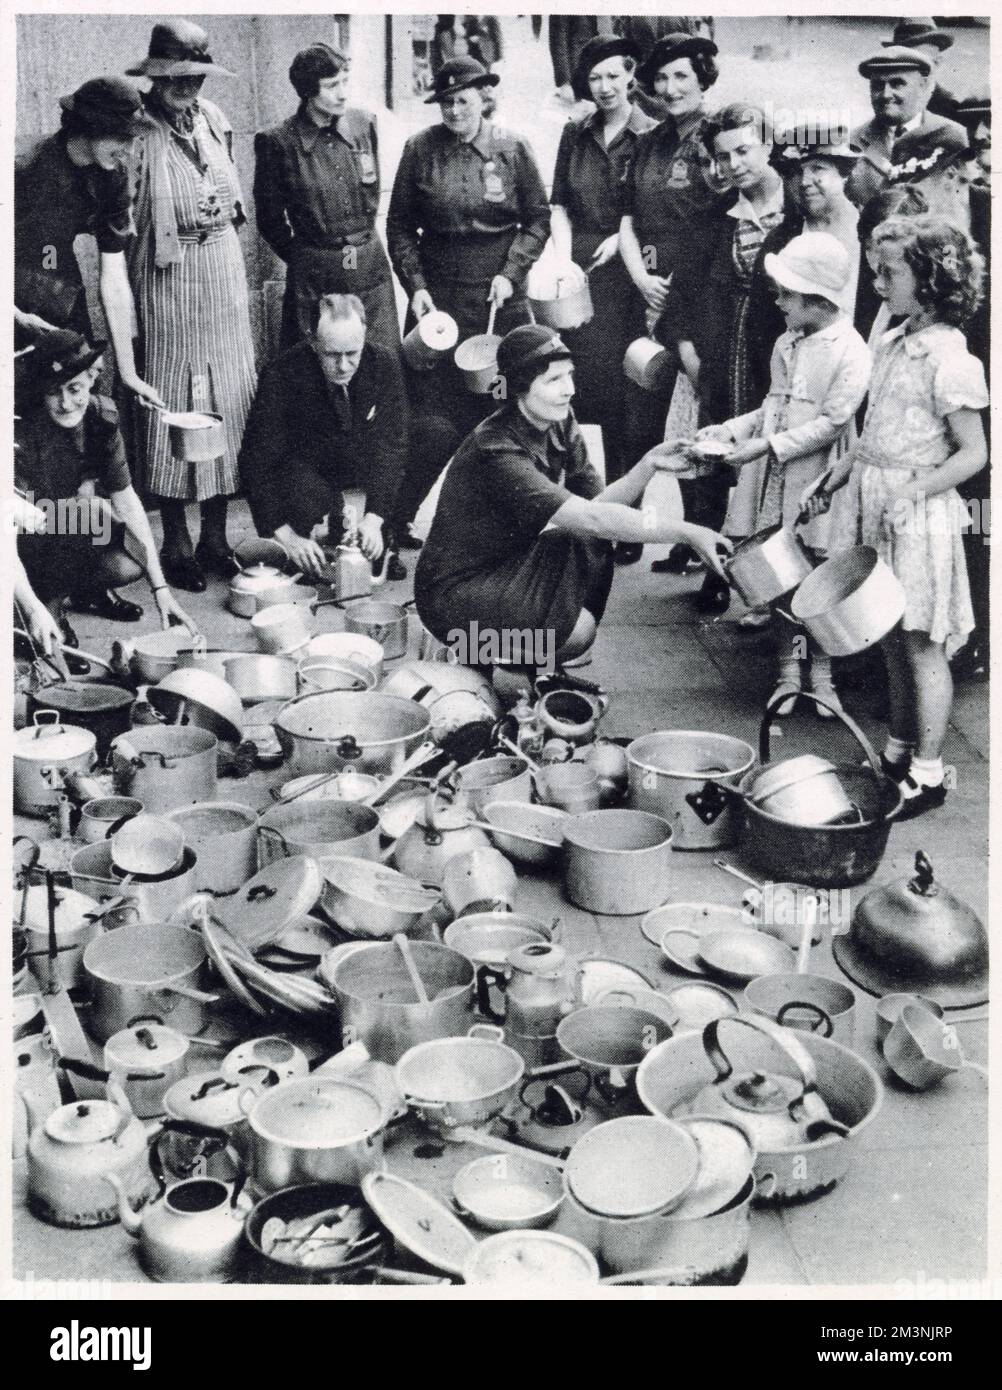 Lord Beaverbrook the Minister for Aircraft Production appealed for objects wholly or partly made of aluminium for the manufacture of aeroplanes. Photograph showing Lady Lucas Tooth who was in charge of a collecting centre of the Women's Voluntary Service in Chelsea receiving pots and pans from the public. Stock Photo